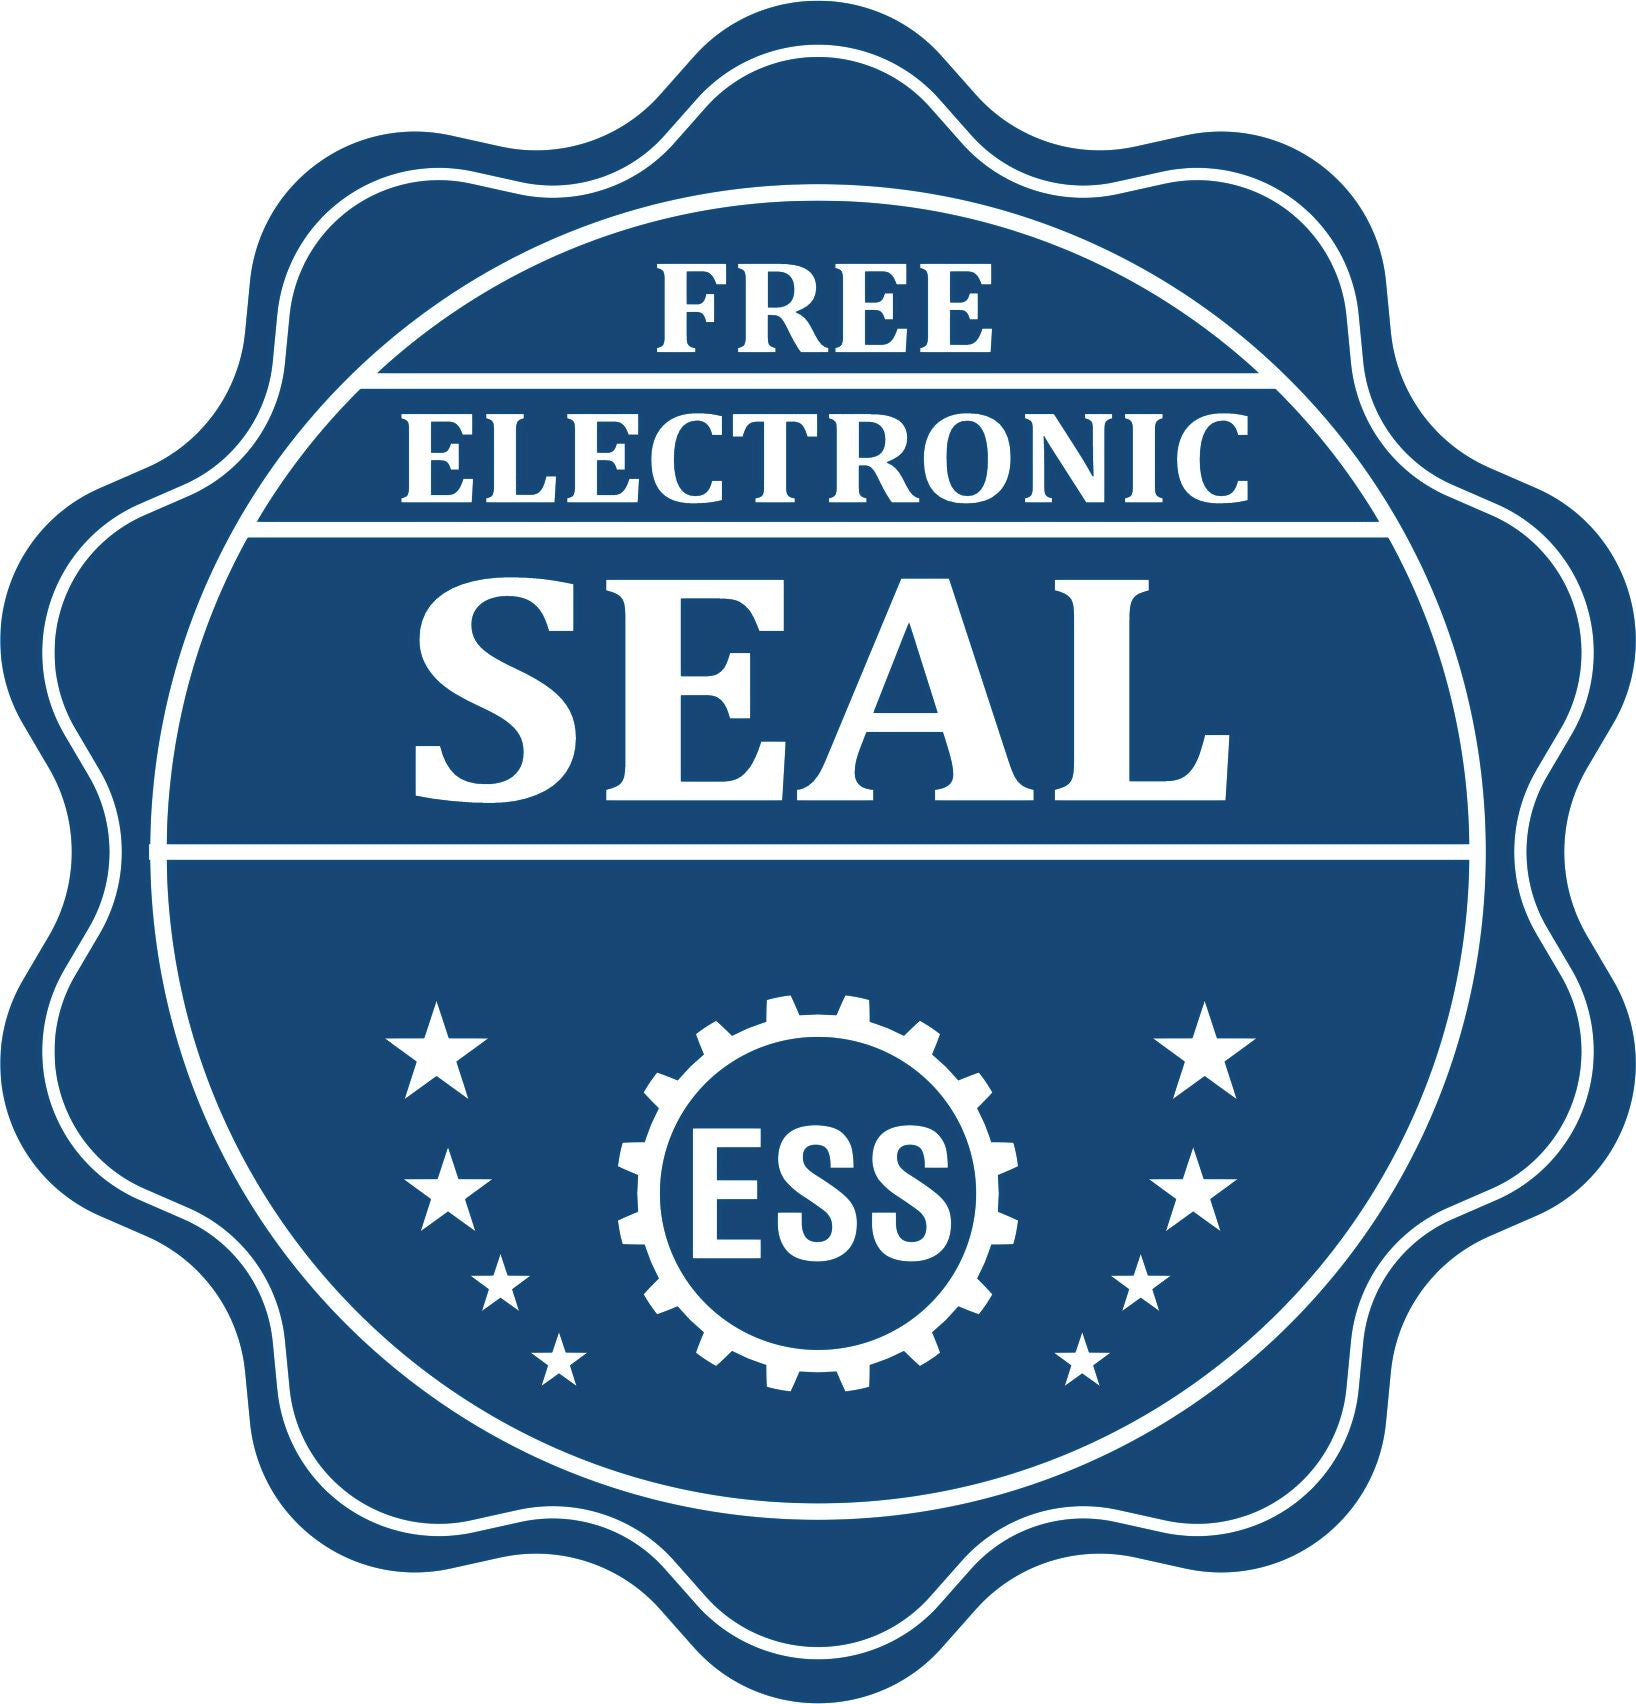 A badge showing a free electronic seal for the Super Slim Alaska Notary Public Stamp with stars and the ESS gear on the emblem.